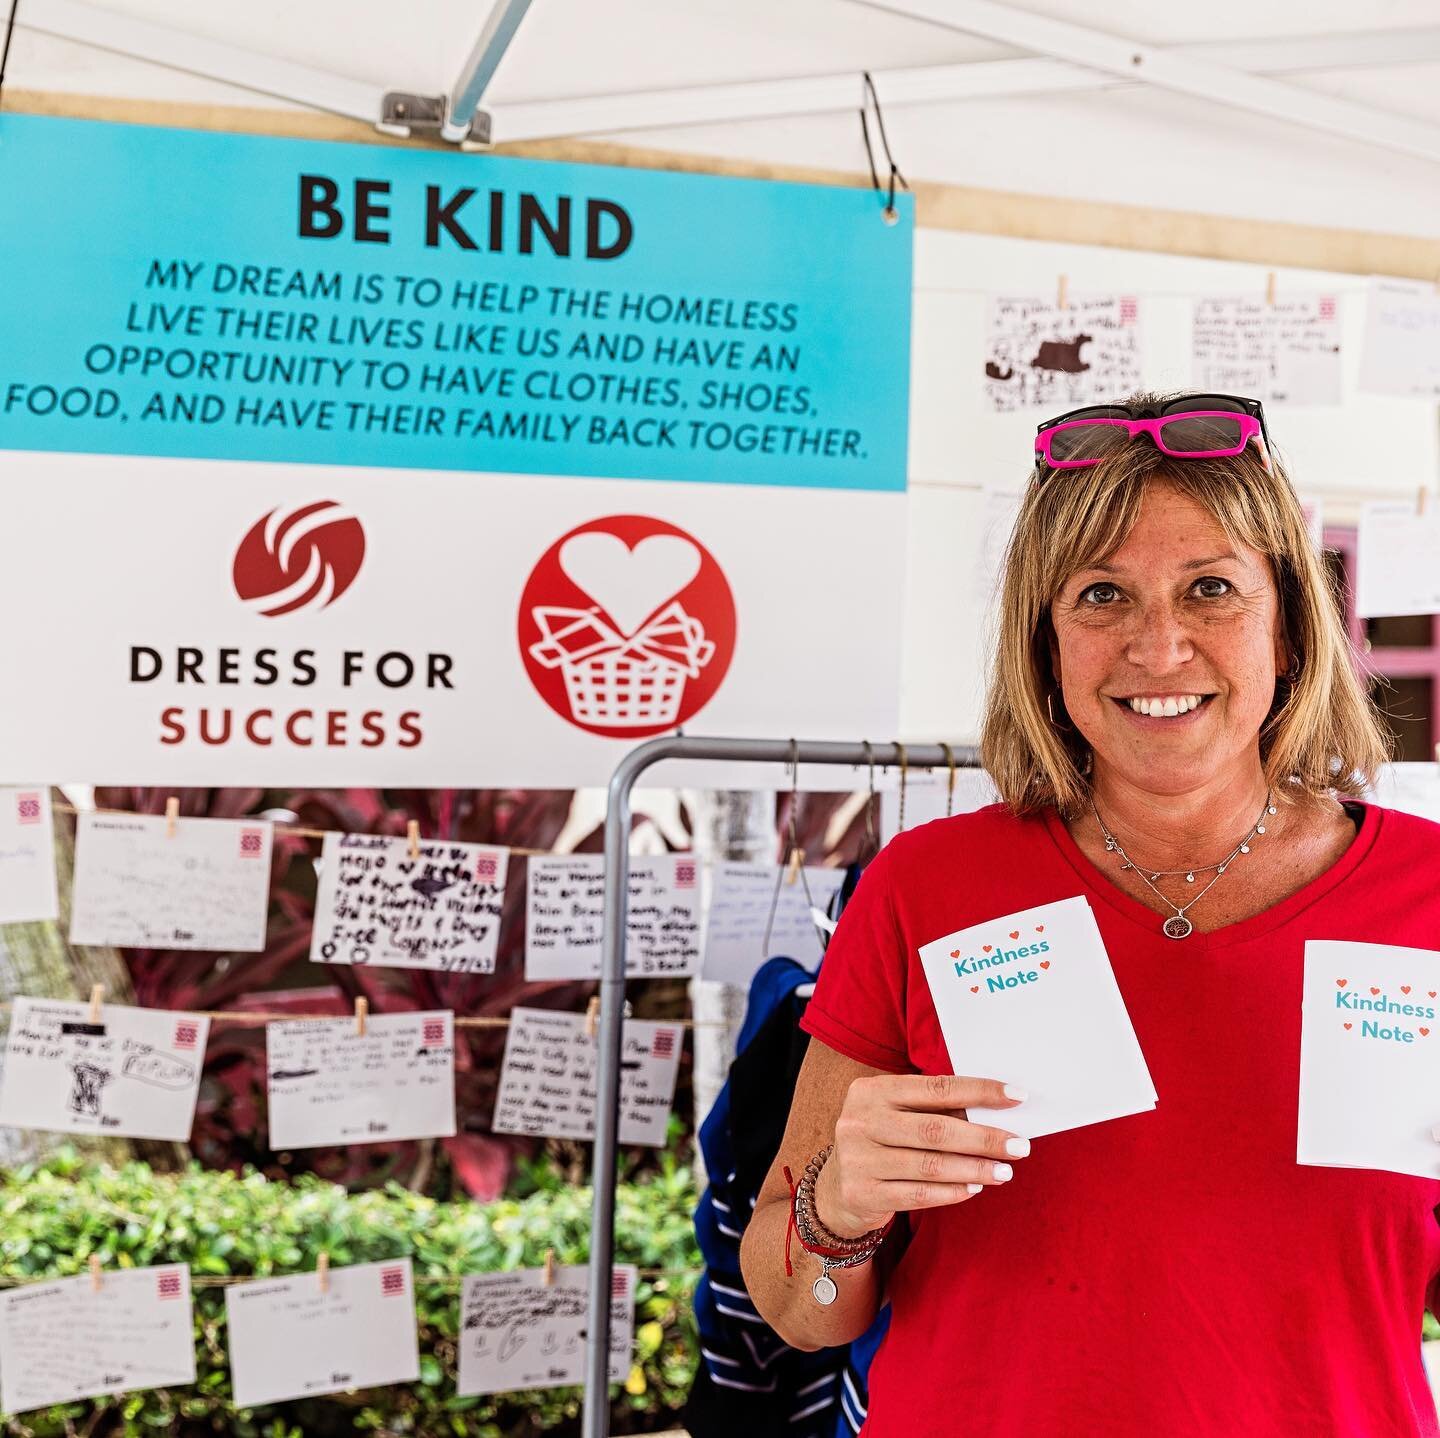 DREAM MACHINE - BE KIND
&rdquo;My dream is to help the homeless live their lives like us and have an opportunity to have clothes, shoes, food, and have their family back together.&rdquo;
Dream station with @dressforsuccess and @laundry-love

Photo: @